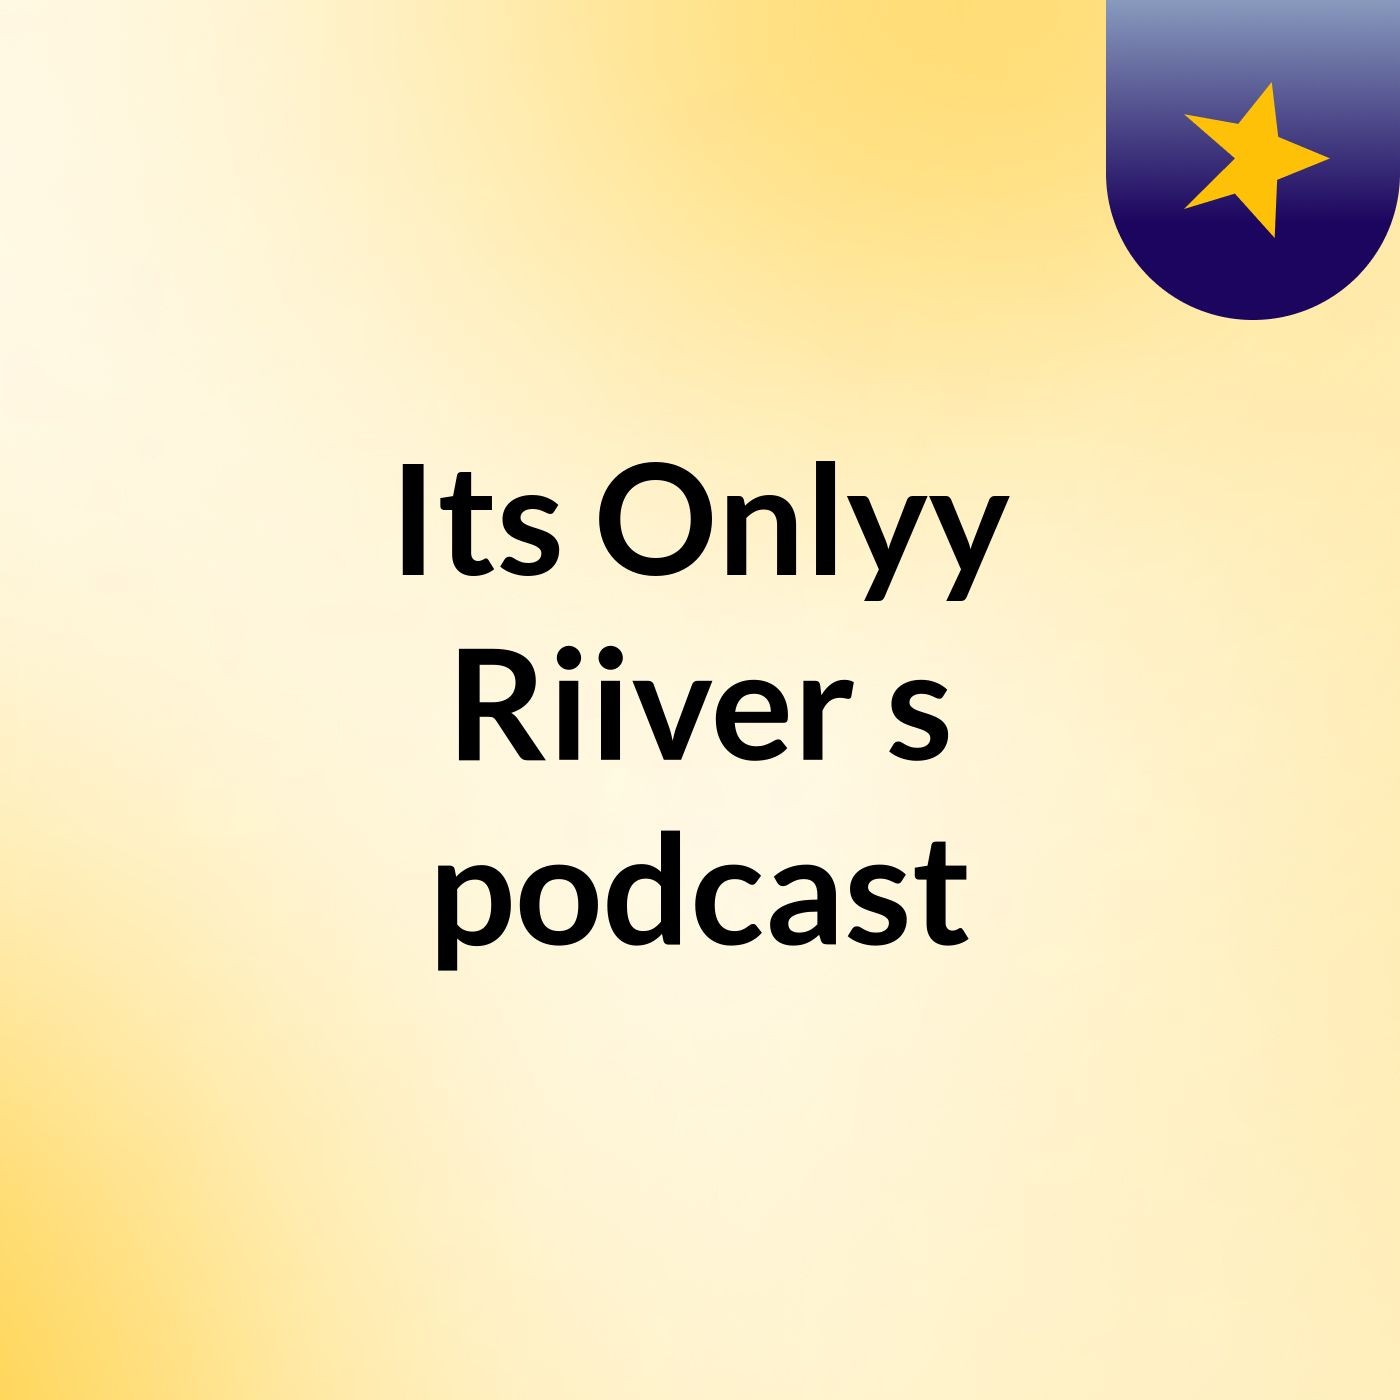 Its Onlyy Riiver’s podcast